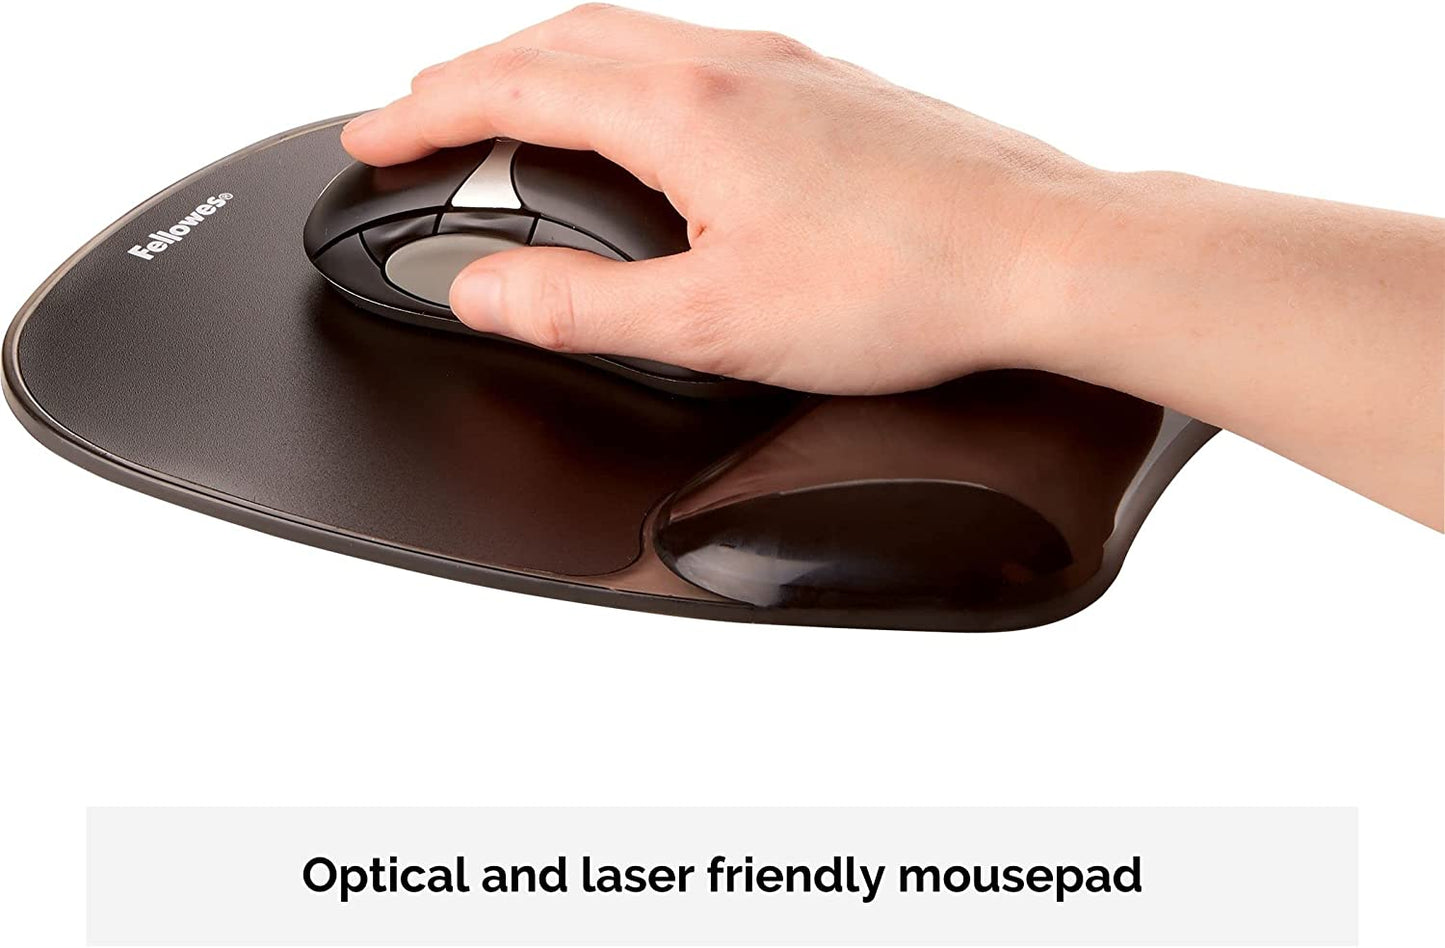 Mouse Mat Wrist Support - Crystals Gel Mouse Pad with Non Slip Rubber Base - Ergonomic Mouse Mat for Computer, Laptop, Home Office Use - Compatible with Laser and Optical Mice - Black